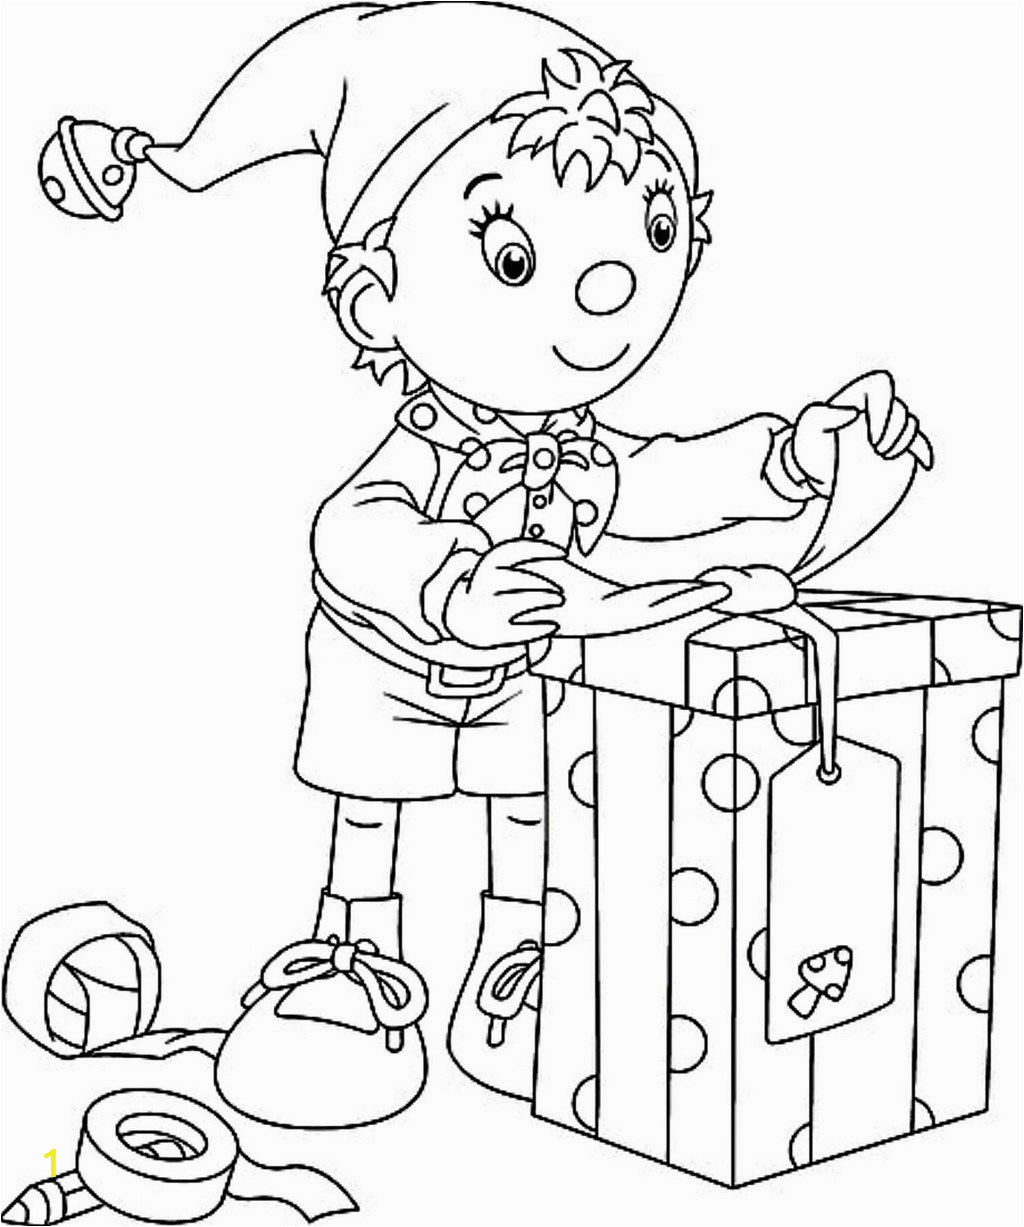 The Elf On the Shelf Coloring Pages – divyajanani.org